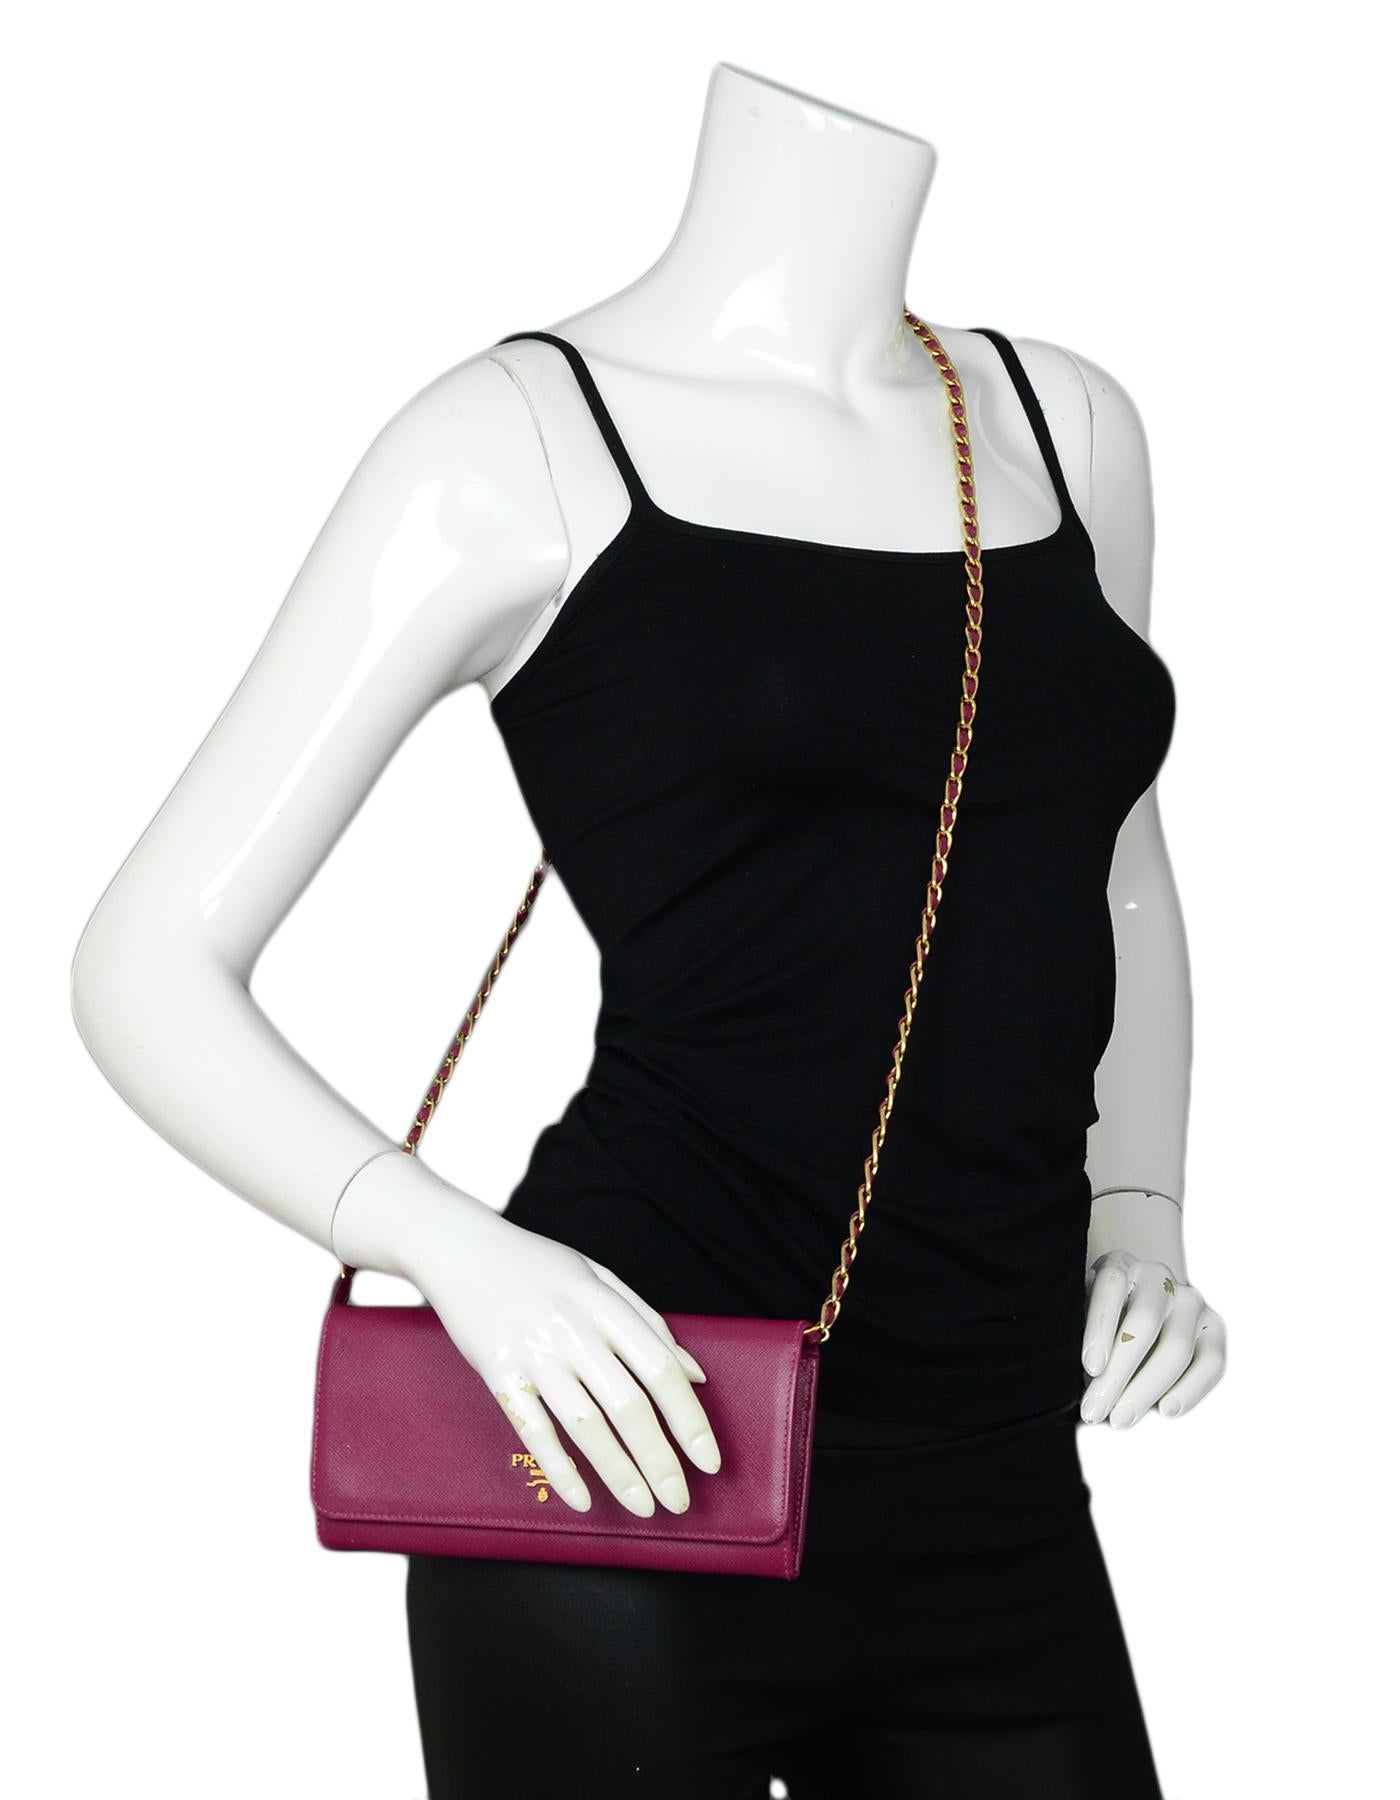 Prada Raspberry Saffiano Metal Oro Chain Wallet Crossbody Bag rt $875

Made In: Italy
Color: Raspberry
Hardware: Goldtone hardware
Materials: Saffiano leather
Lining: Raspberry leather lining
Closure/Opening: Top flap with two snaps
Exterior